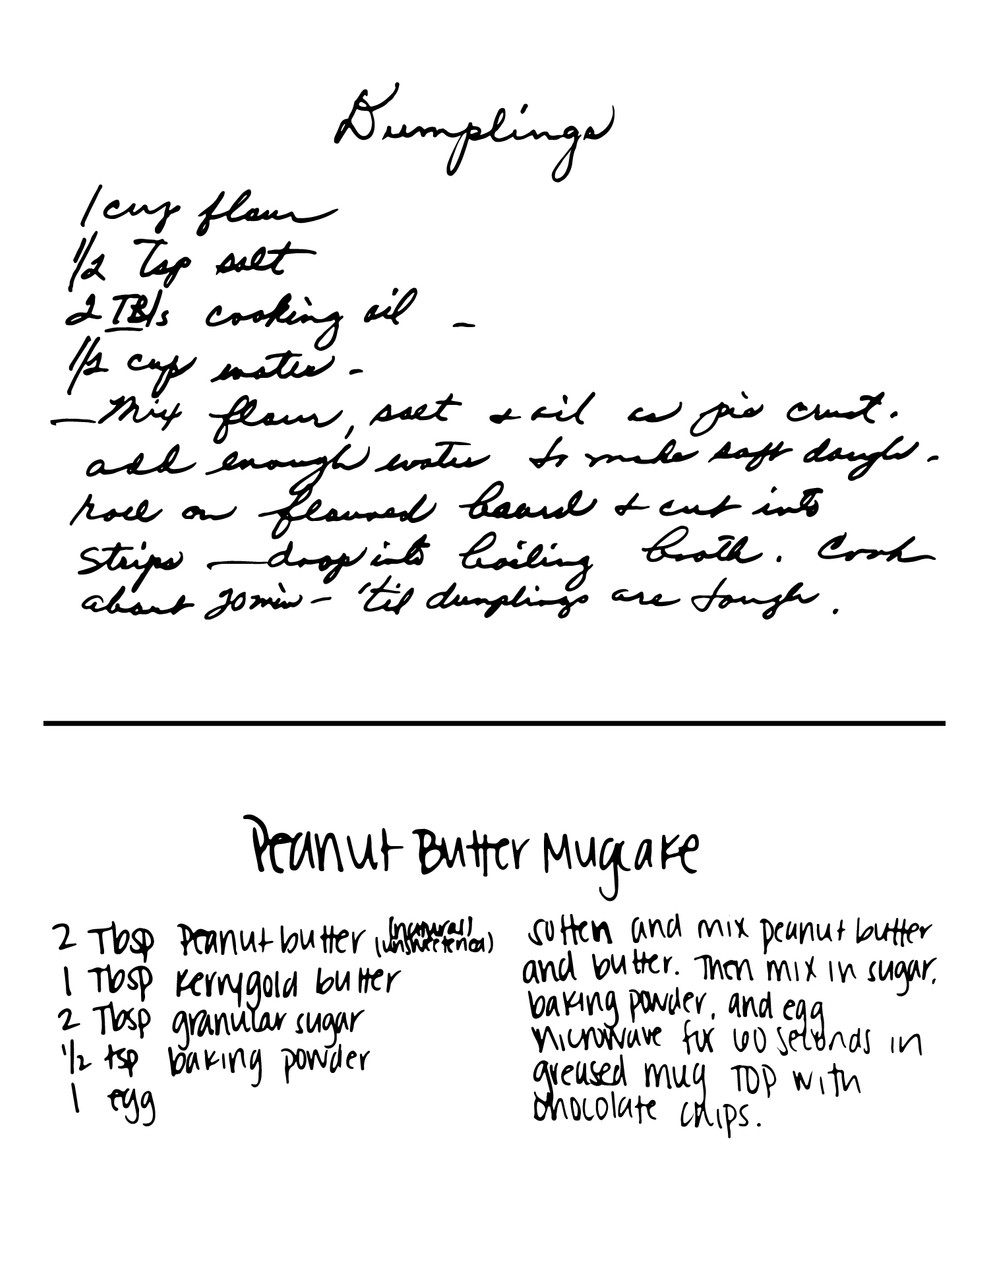 How to Save Your Handwritten Recipes